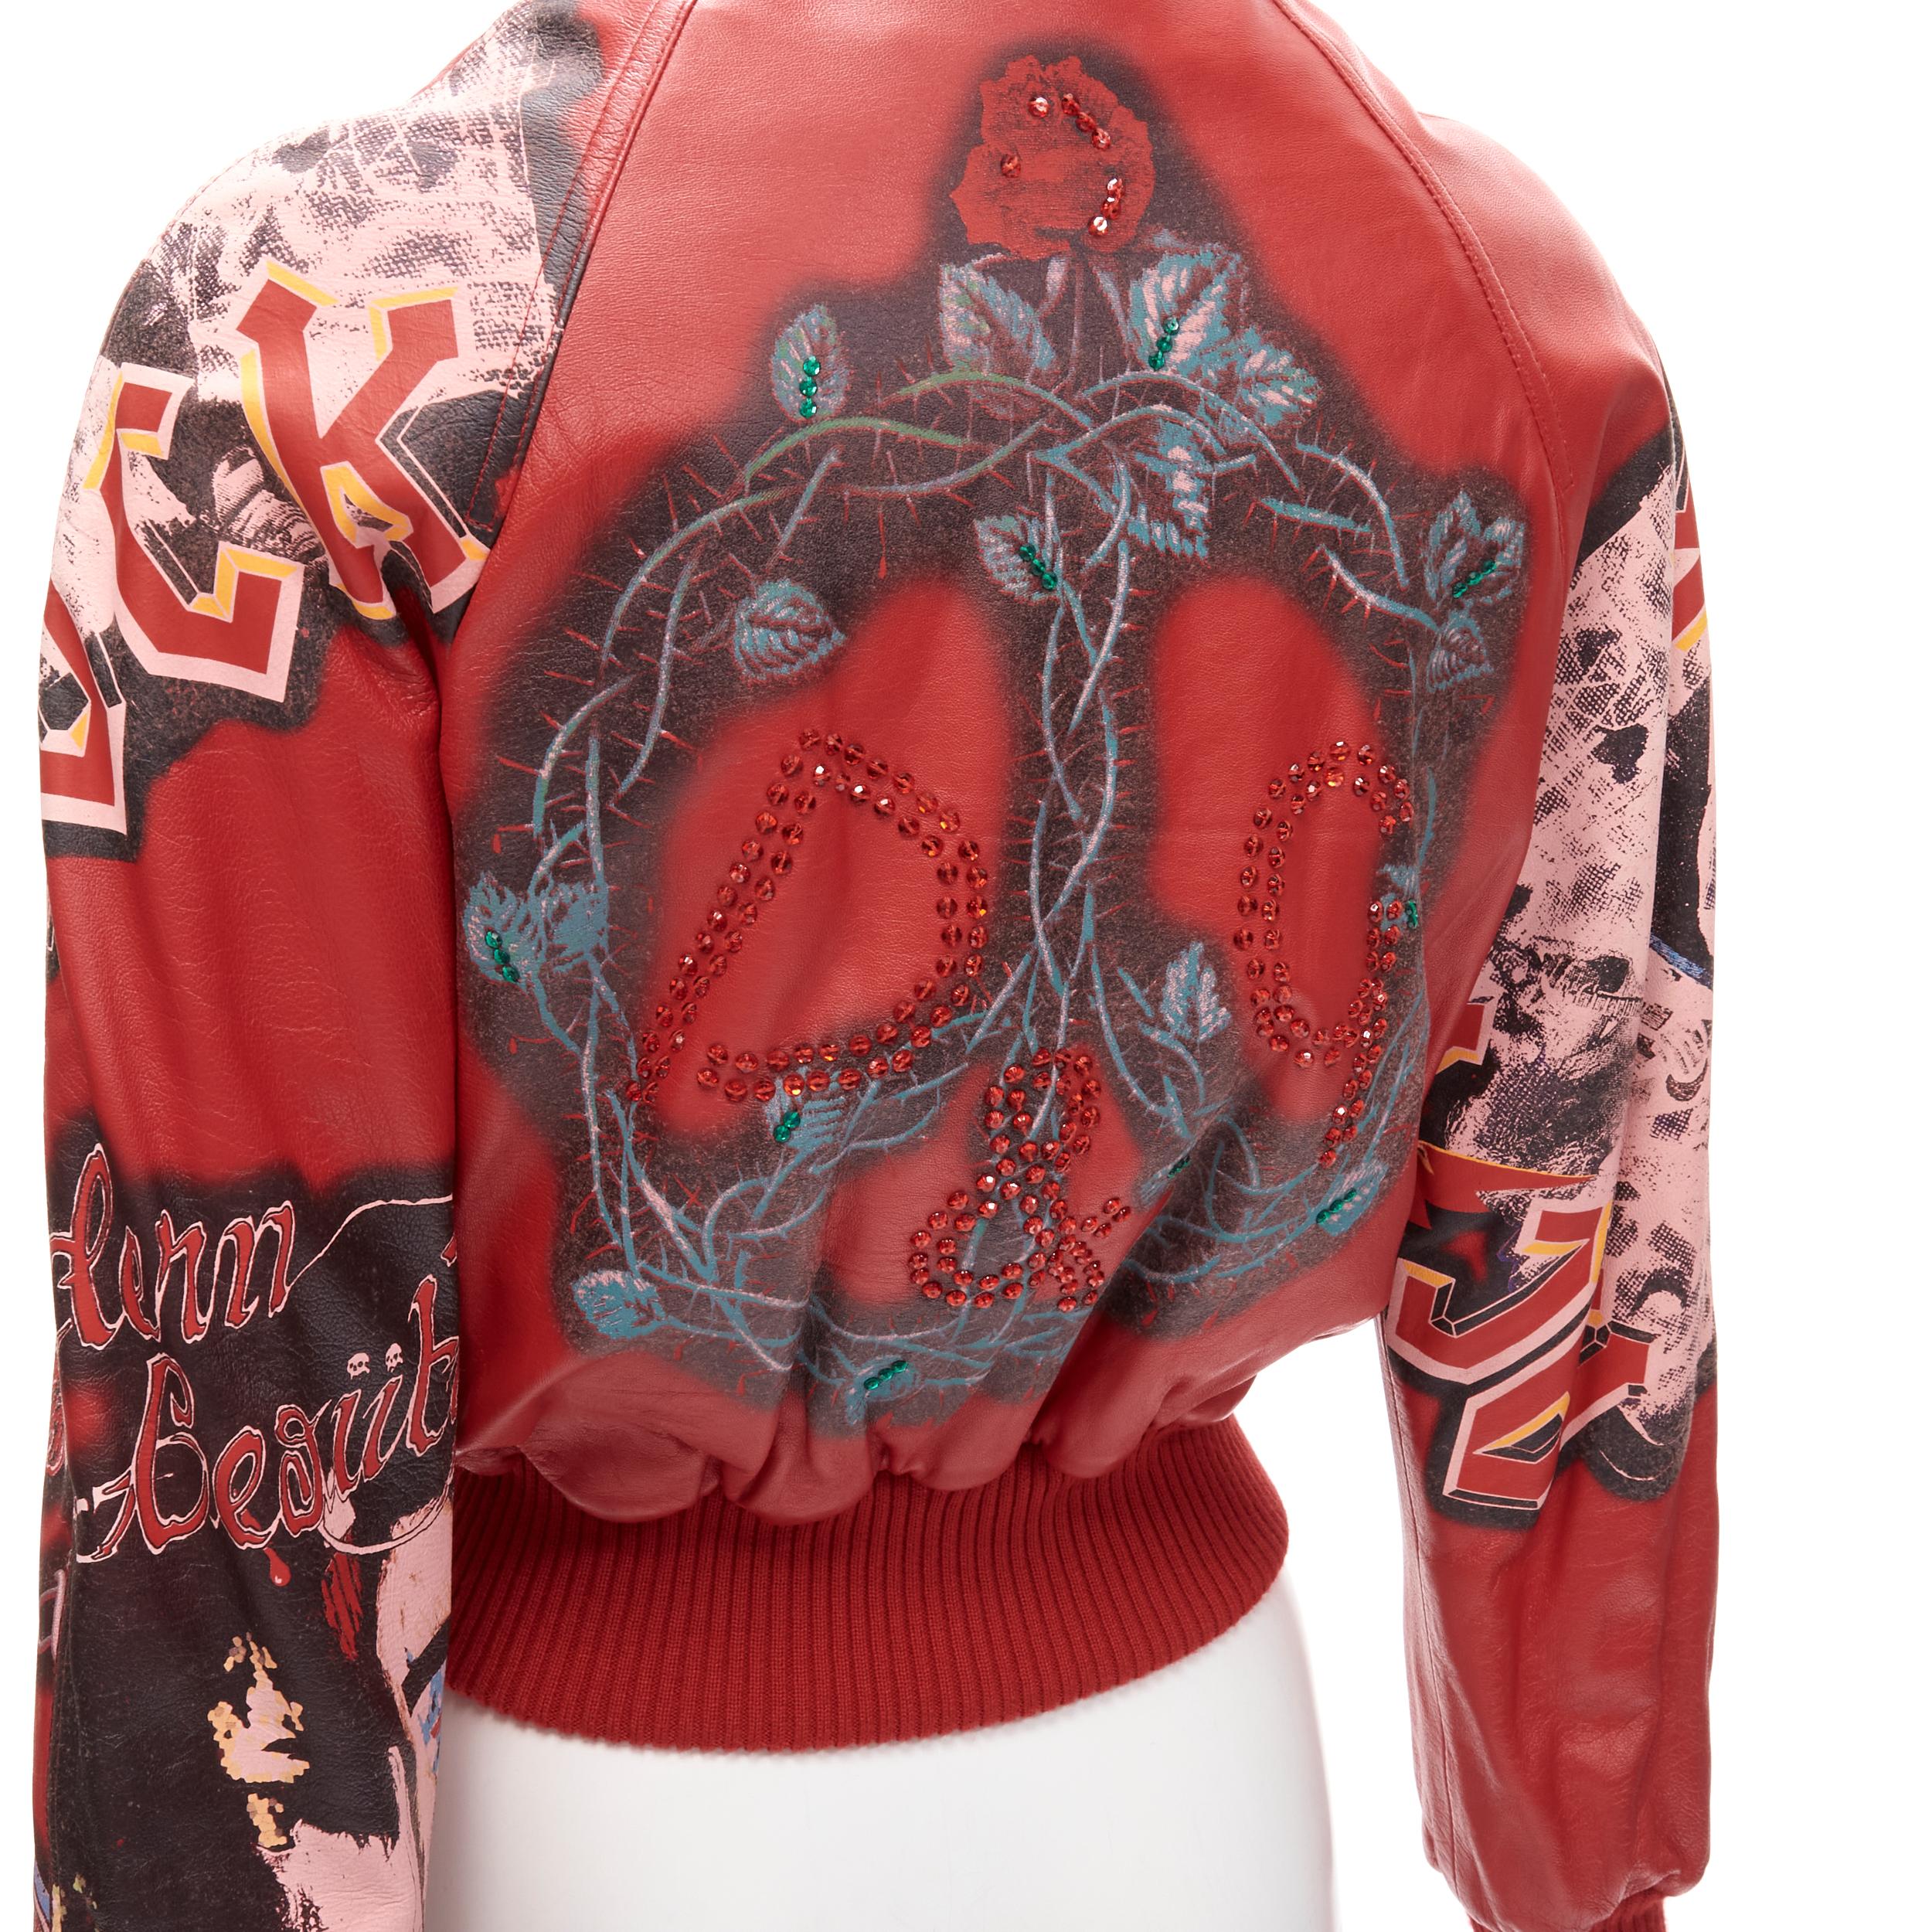 rare D&G DOLCE GABBANA Vintage 2001 Runway Acid Rock rock leather bomber IT38 XS 
Reference: ANWU/A00745 
Brand: D&G 
Collection: Fall Winter 2001 Runway 
Material: Leather 
Color: Red 
Pattern: Rock Roll band print 
Closure: Zip 
Extra Detail: